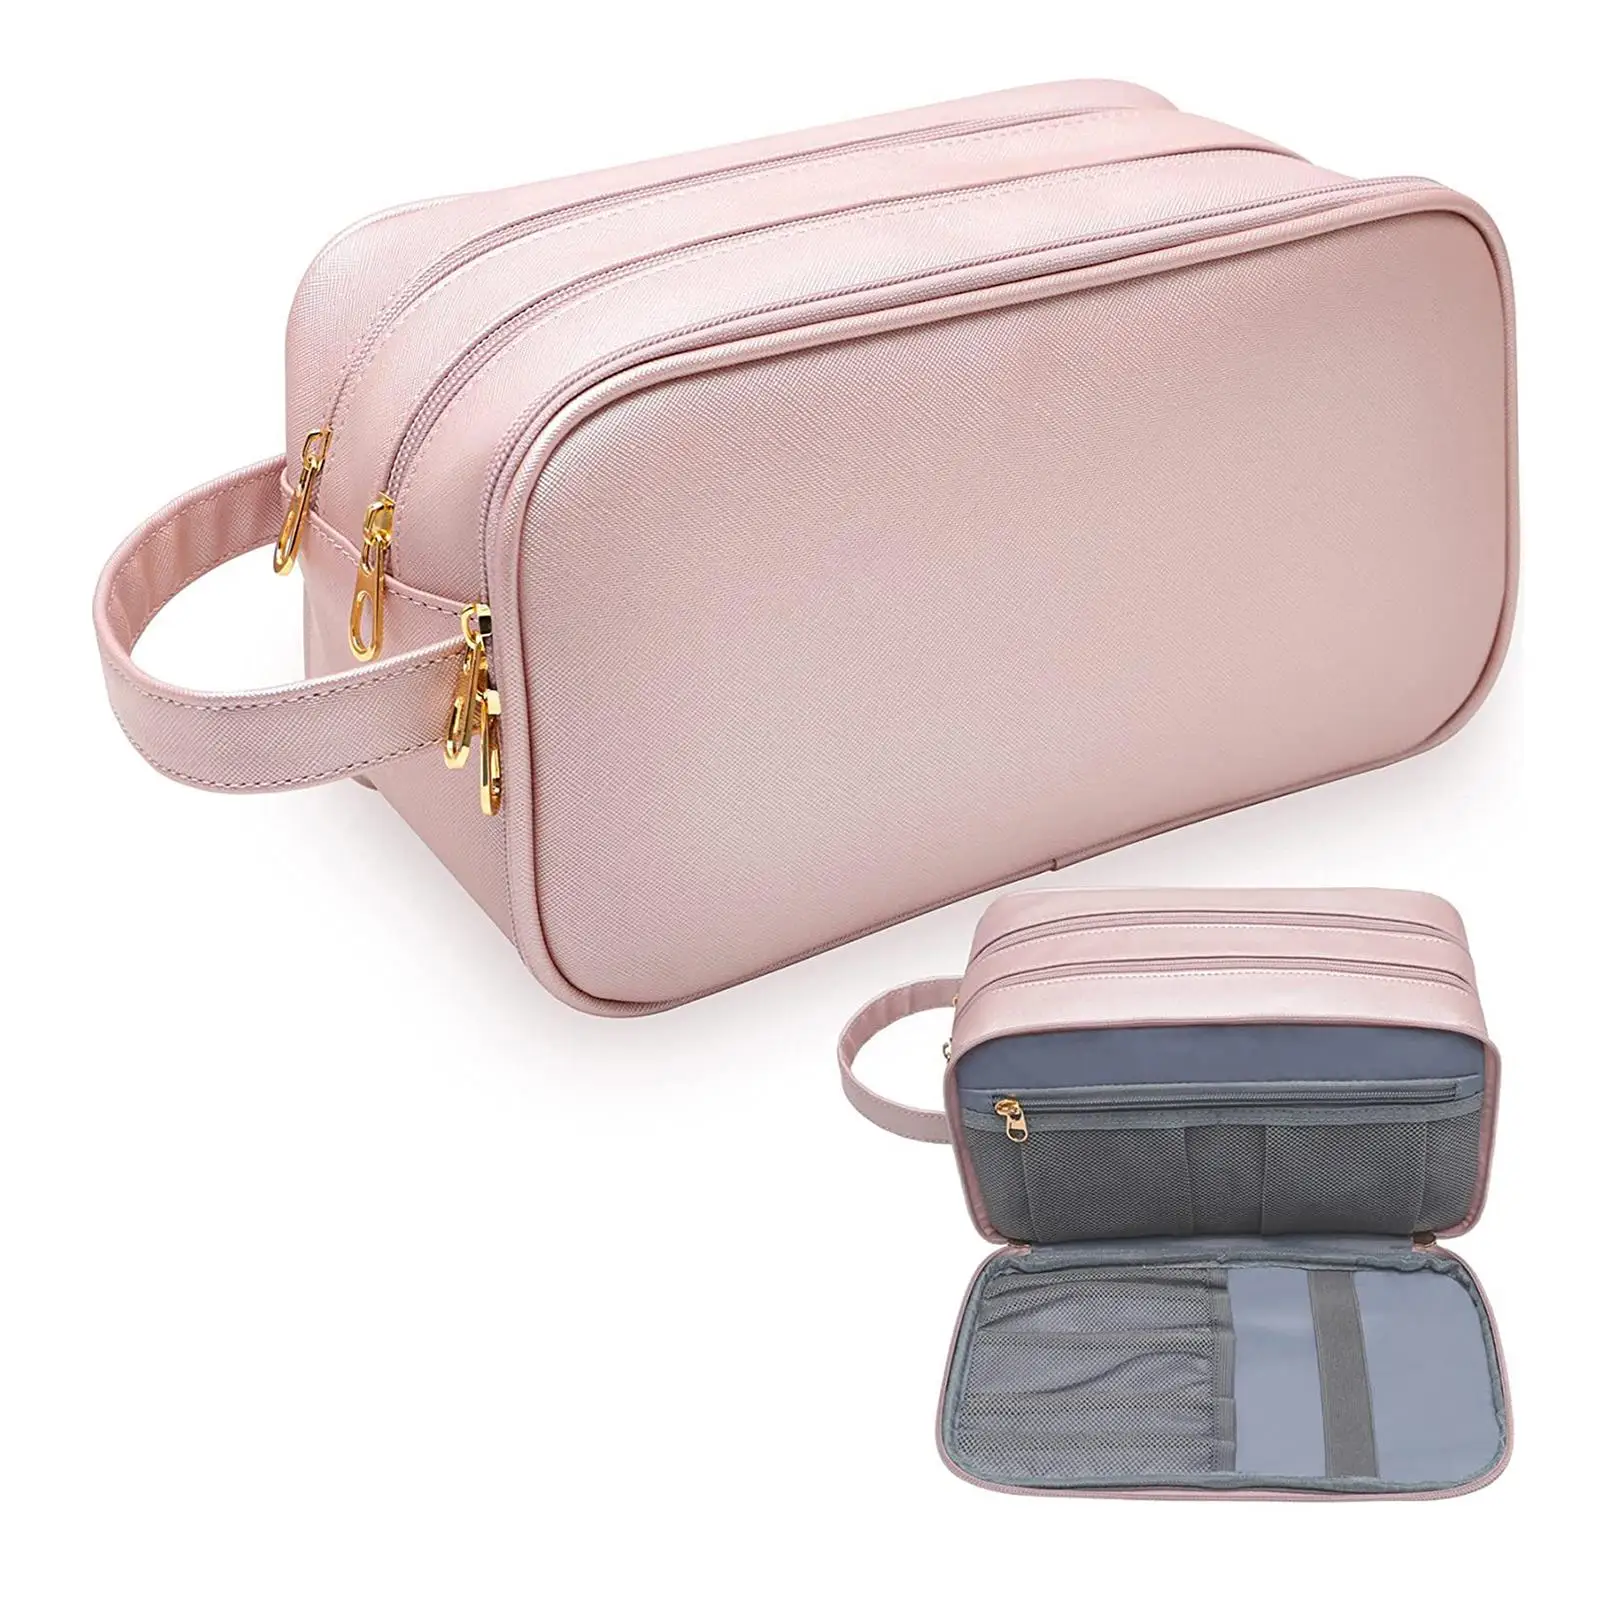 Portable PU Leather Toiletry Bag Cosmetic Organizer Large Capacity Travel Makeup Bag for Accessories for Women Men Home Use Gym